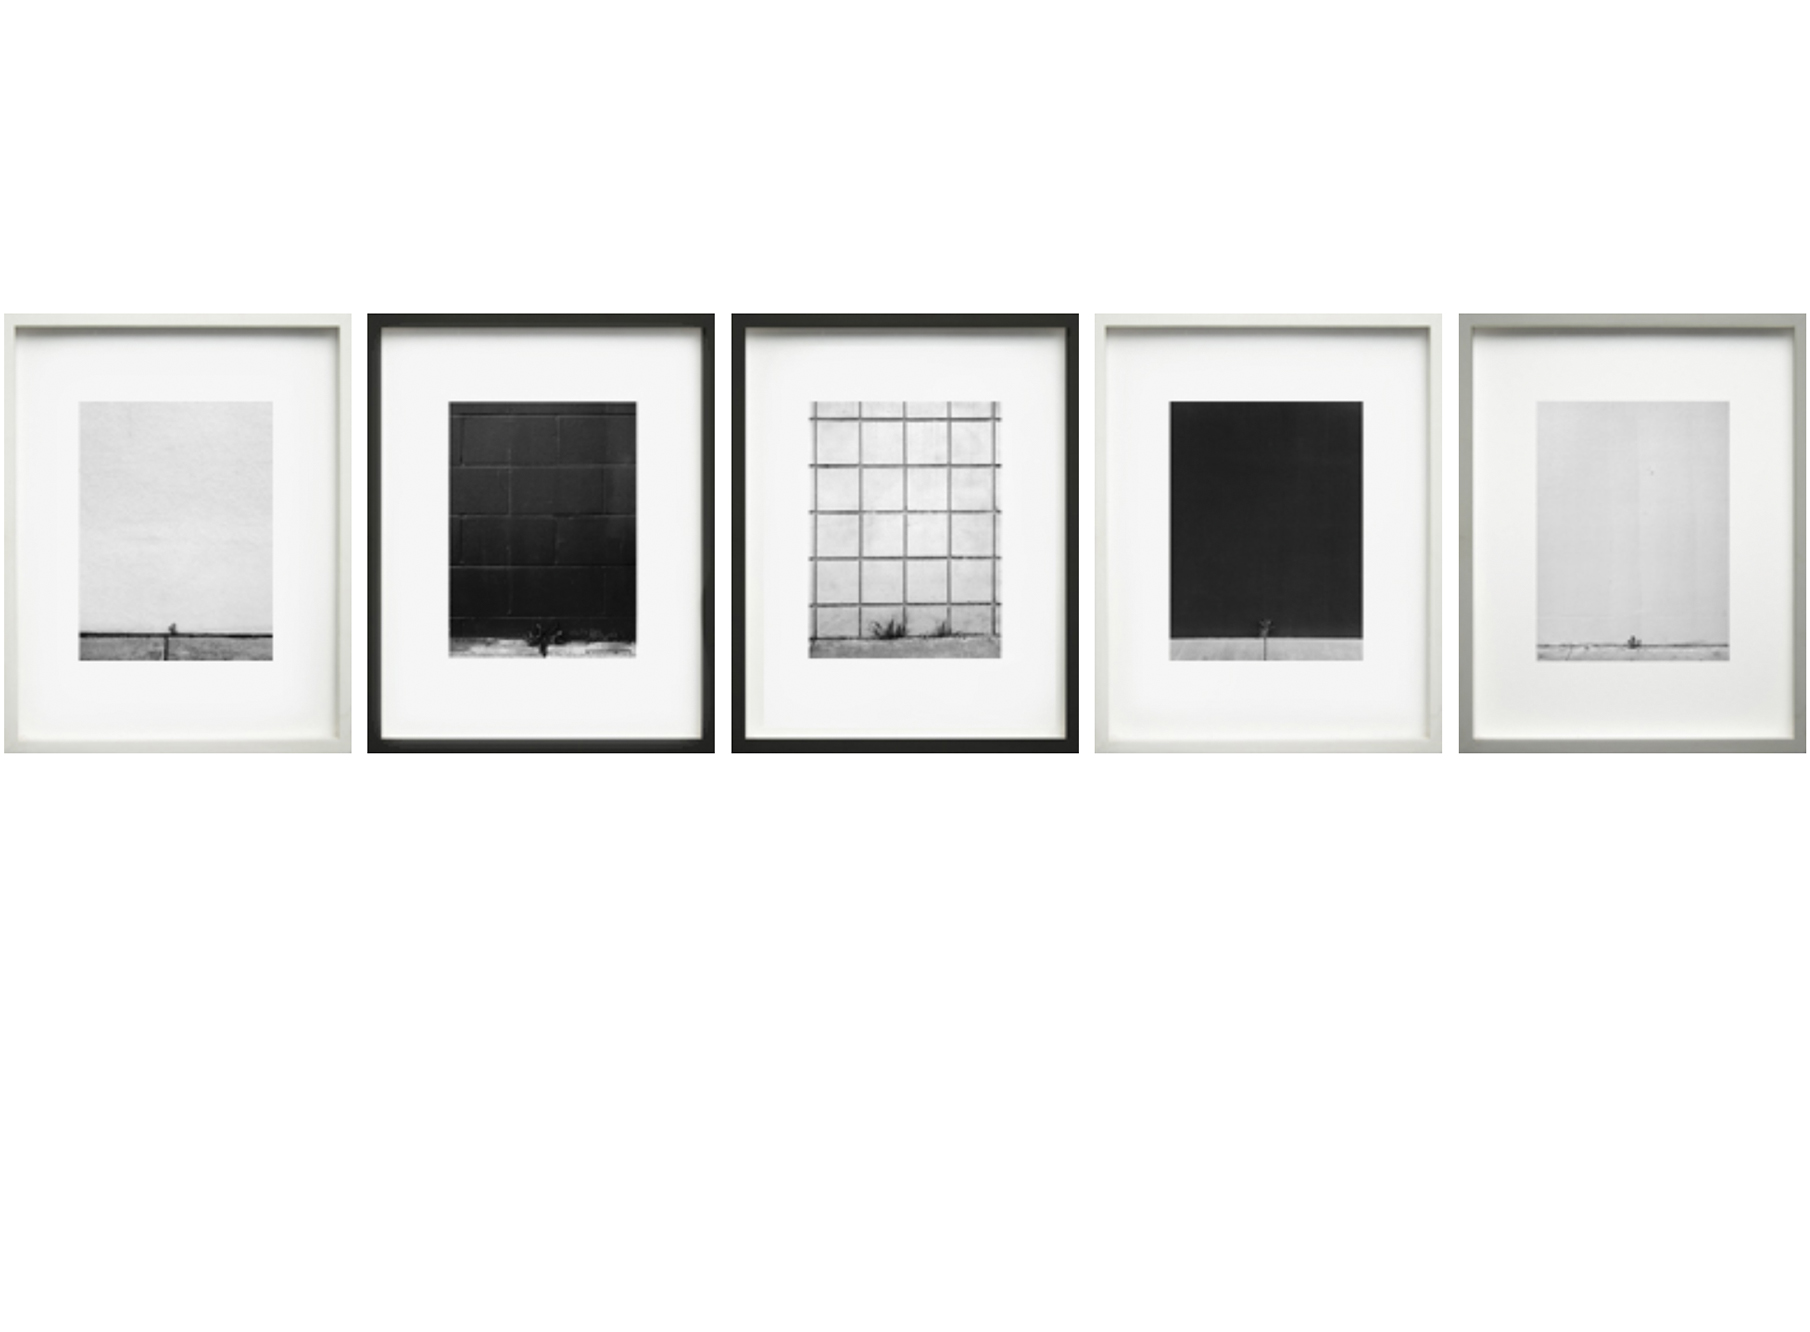  Series of 5, framed, one size, specific frame colors 2006-2008 